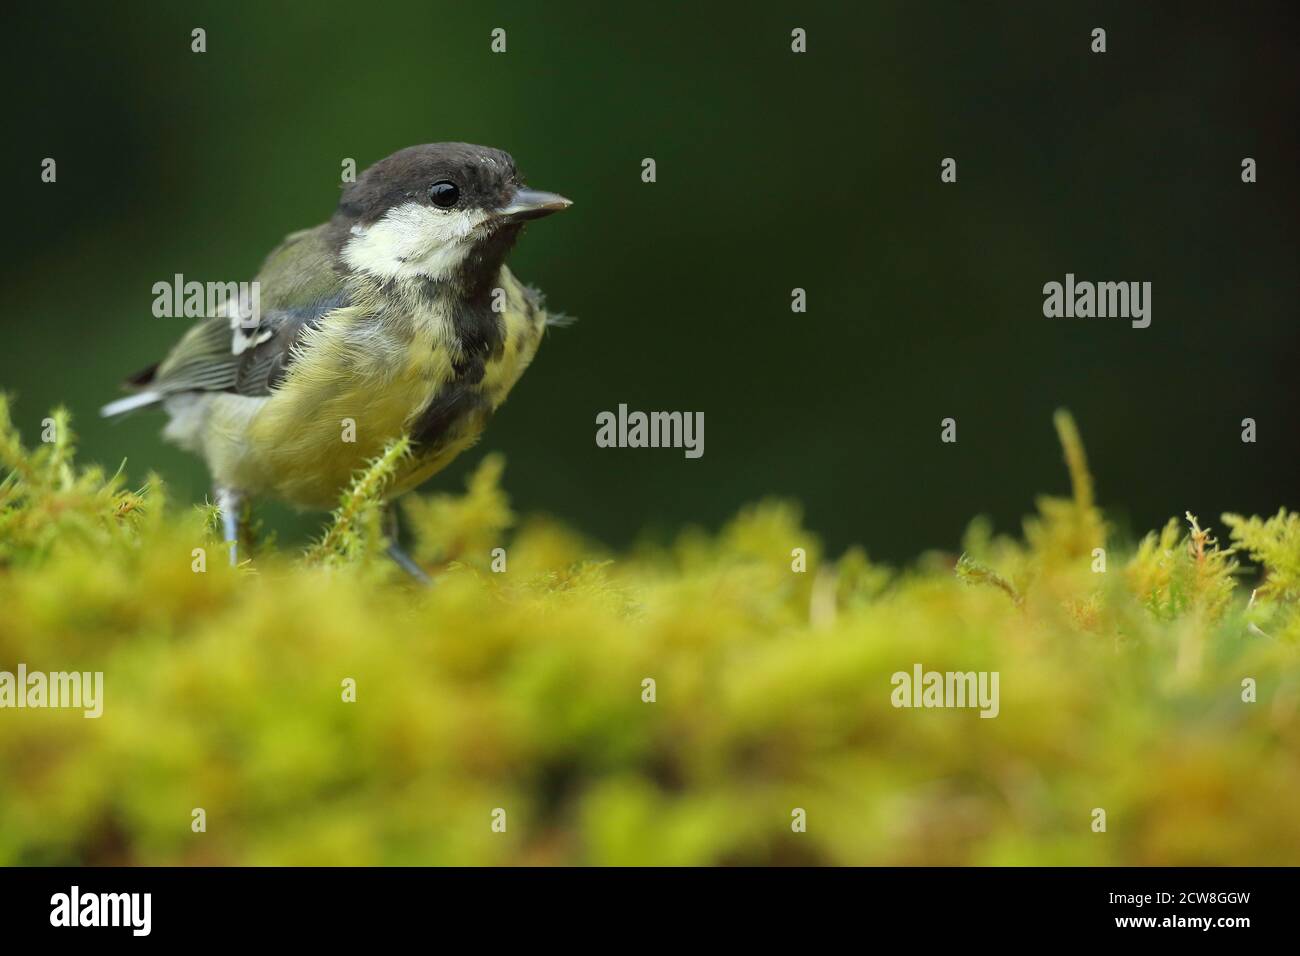 Adult Great Tit bird ( Parus major ) perched in woodland, taken in Wales 2020. Stock Photo